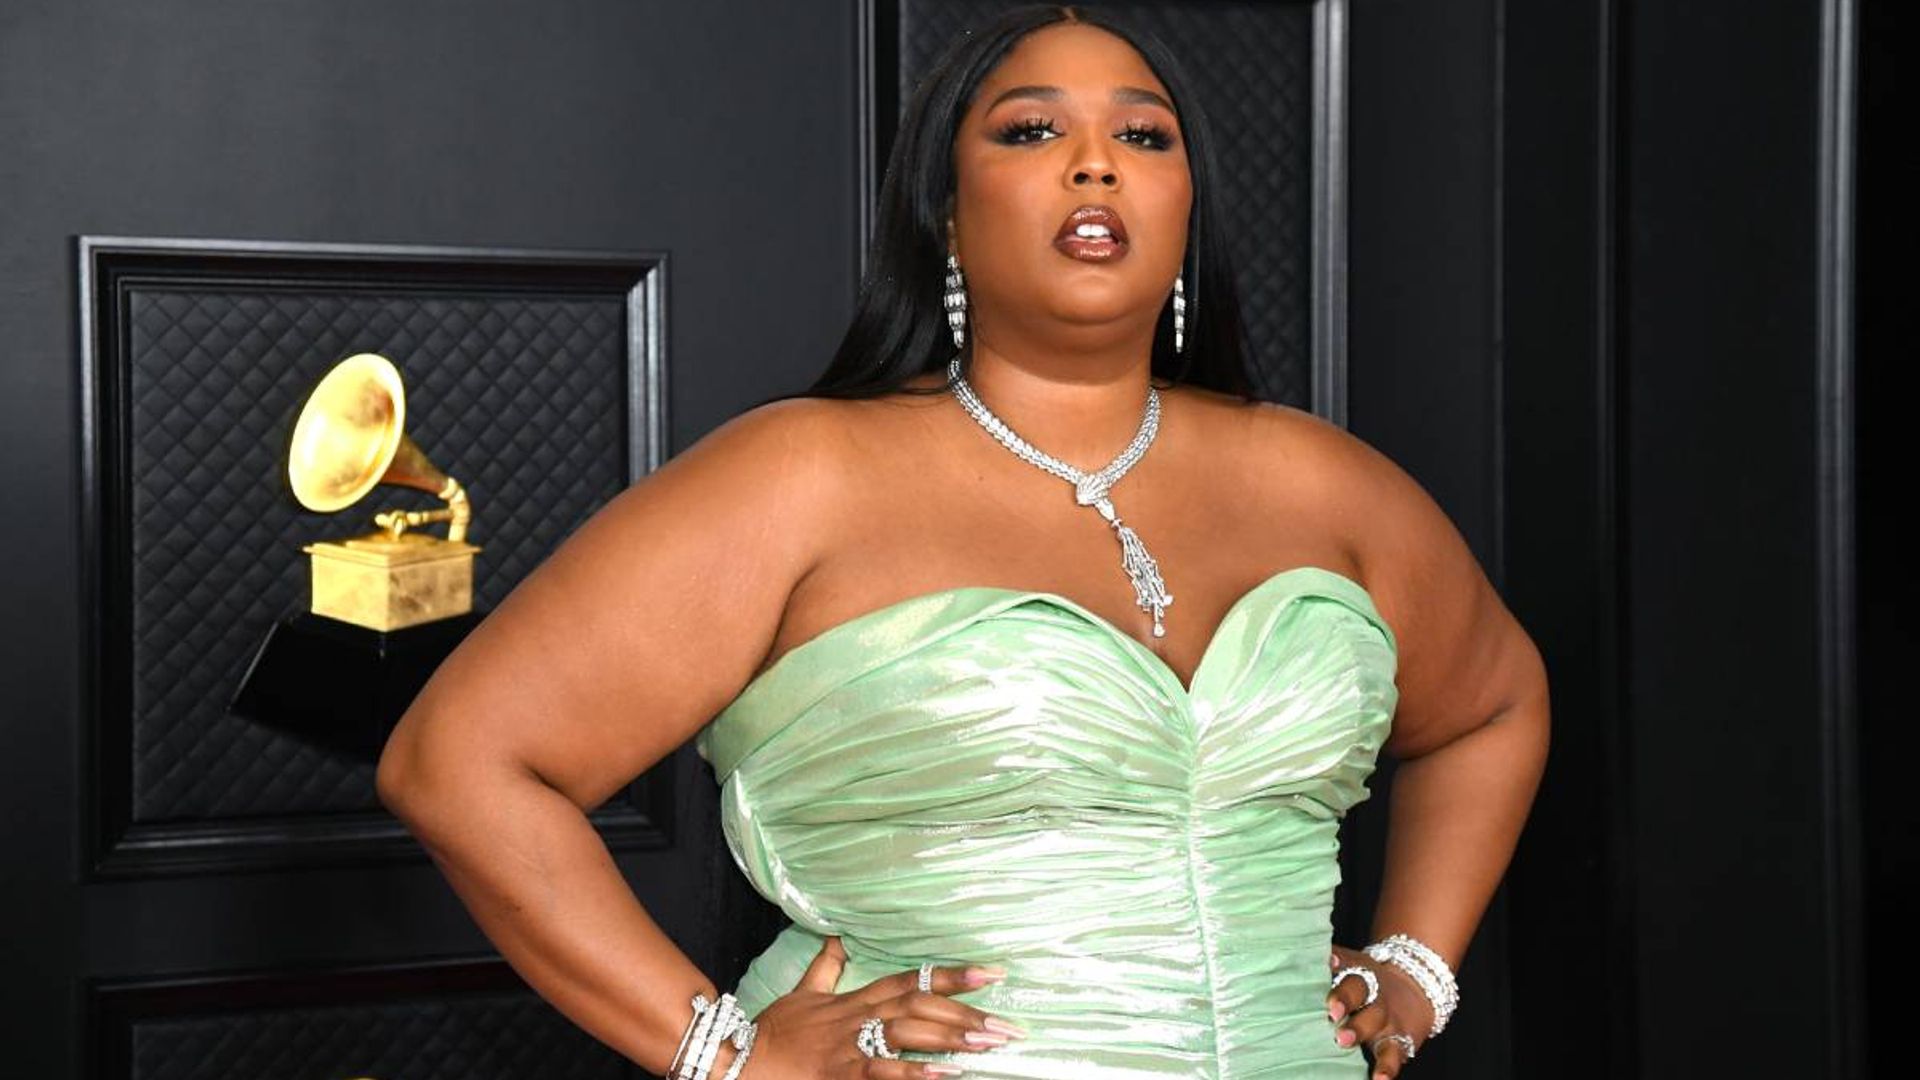 Lizzo went full glam for her birthday in the furriest heels we’ve ever seen 